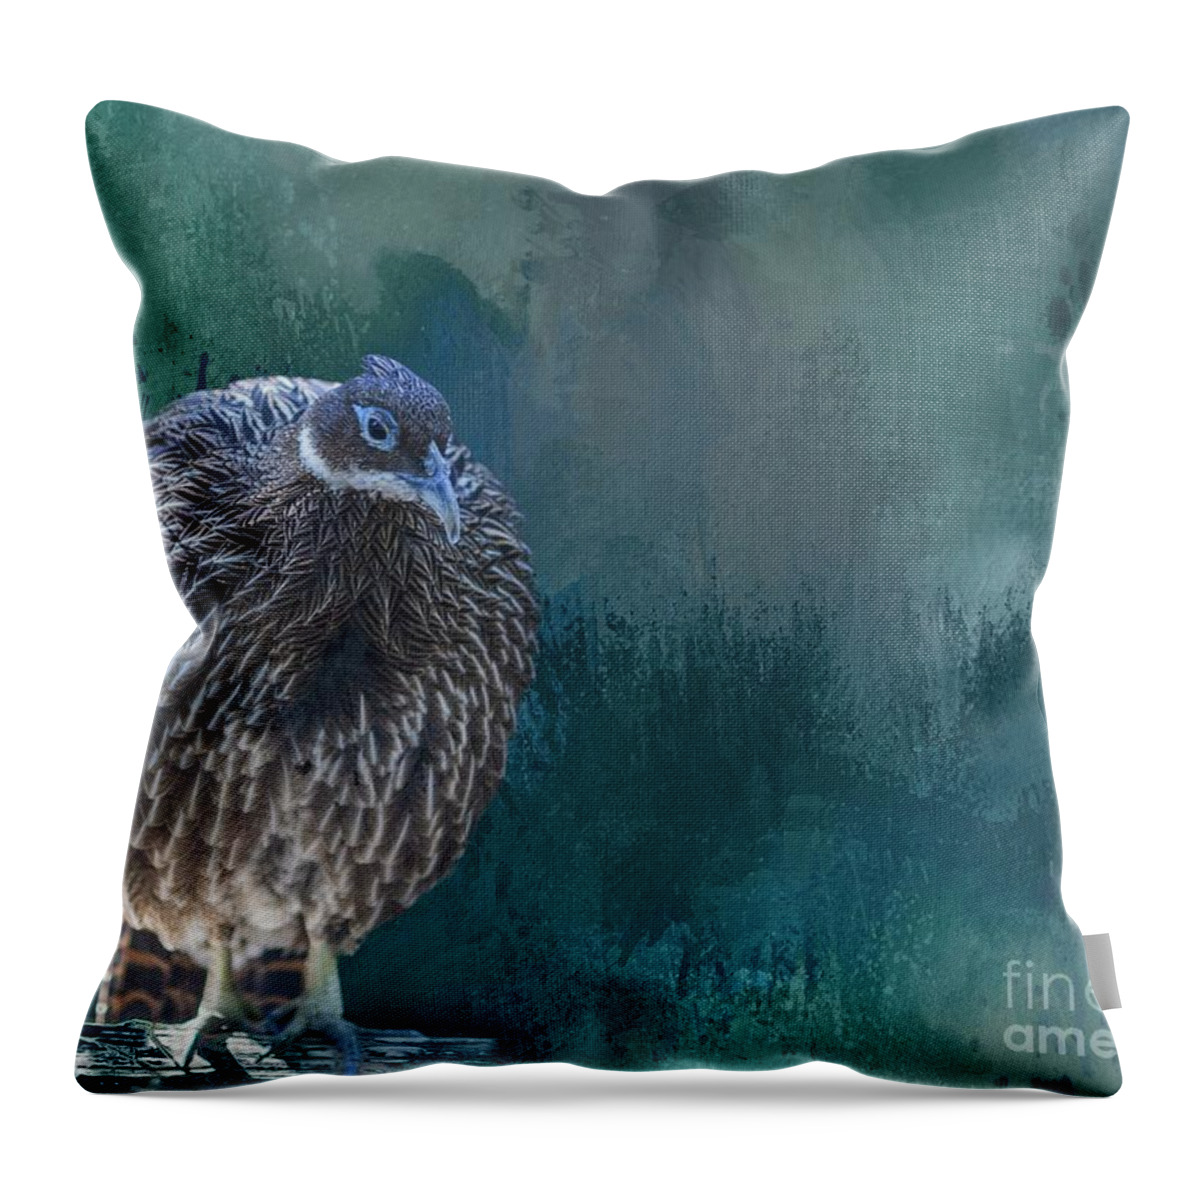 Pheasant Throw Pillow featuring the photograph Himalayan Monal by Eva Lechner